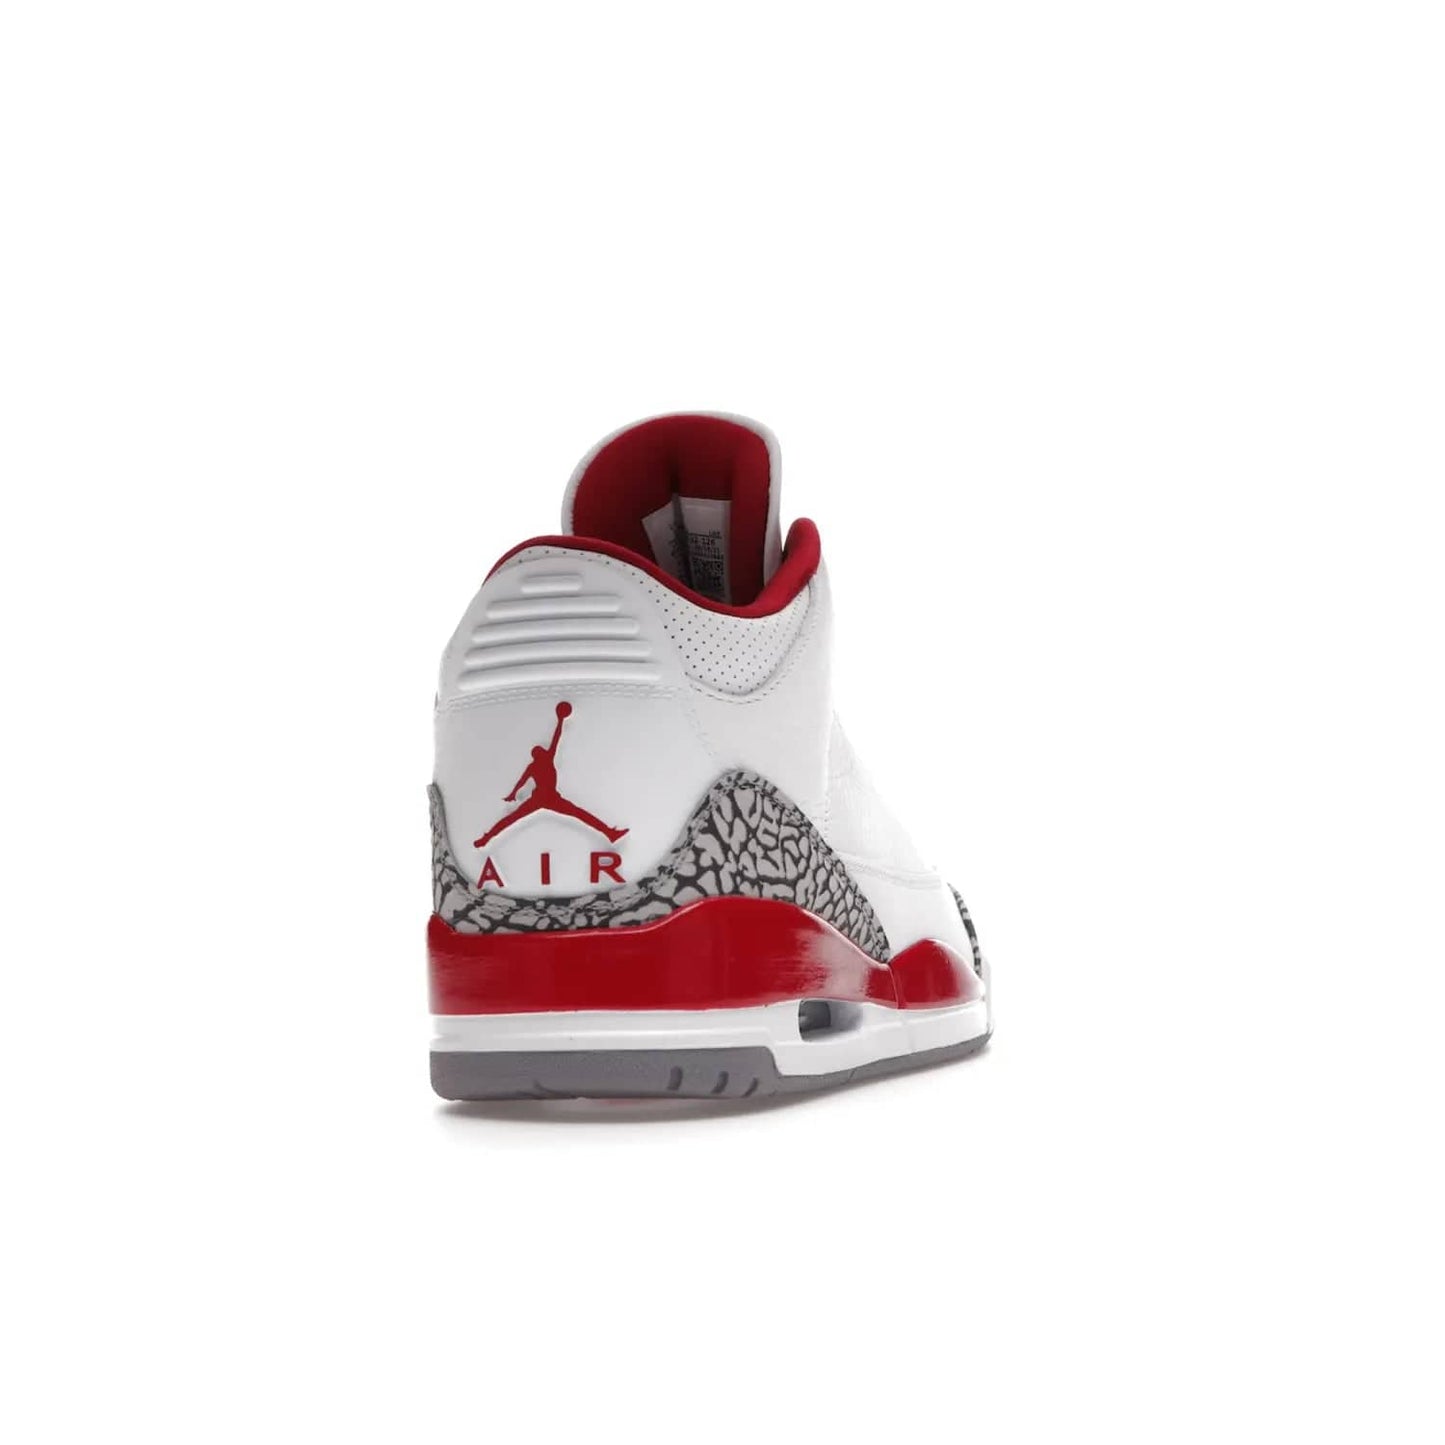 Jordan 3 Retro Cardinal Red - Image 30 - Only at www.BallersClubKickz.com - Air Jordan 3 Retro Cardinal Red combines classic style and modern appeal - white tumbled leather, signature Elephant Print overlays, cardinal red midsoles, Jumpman logo embroidery. Available Feb 2022.